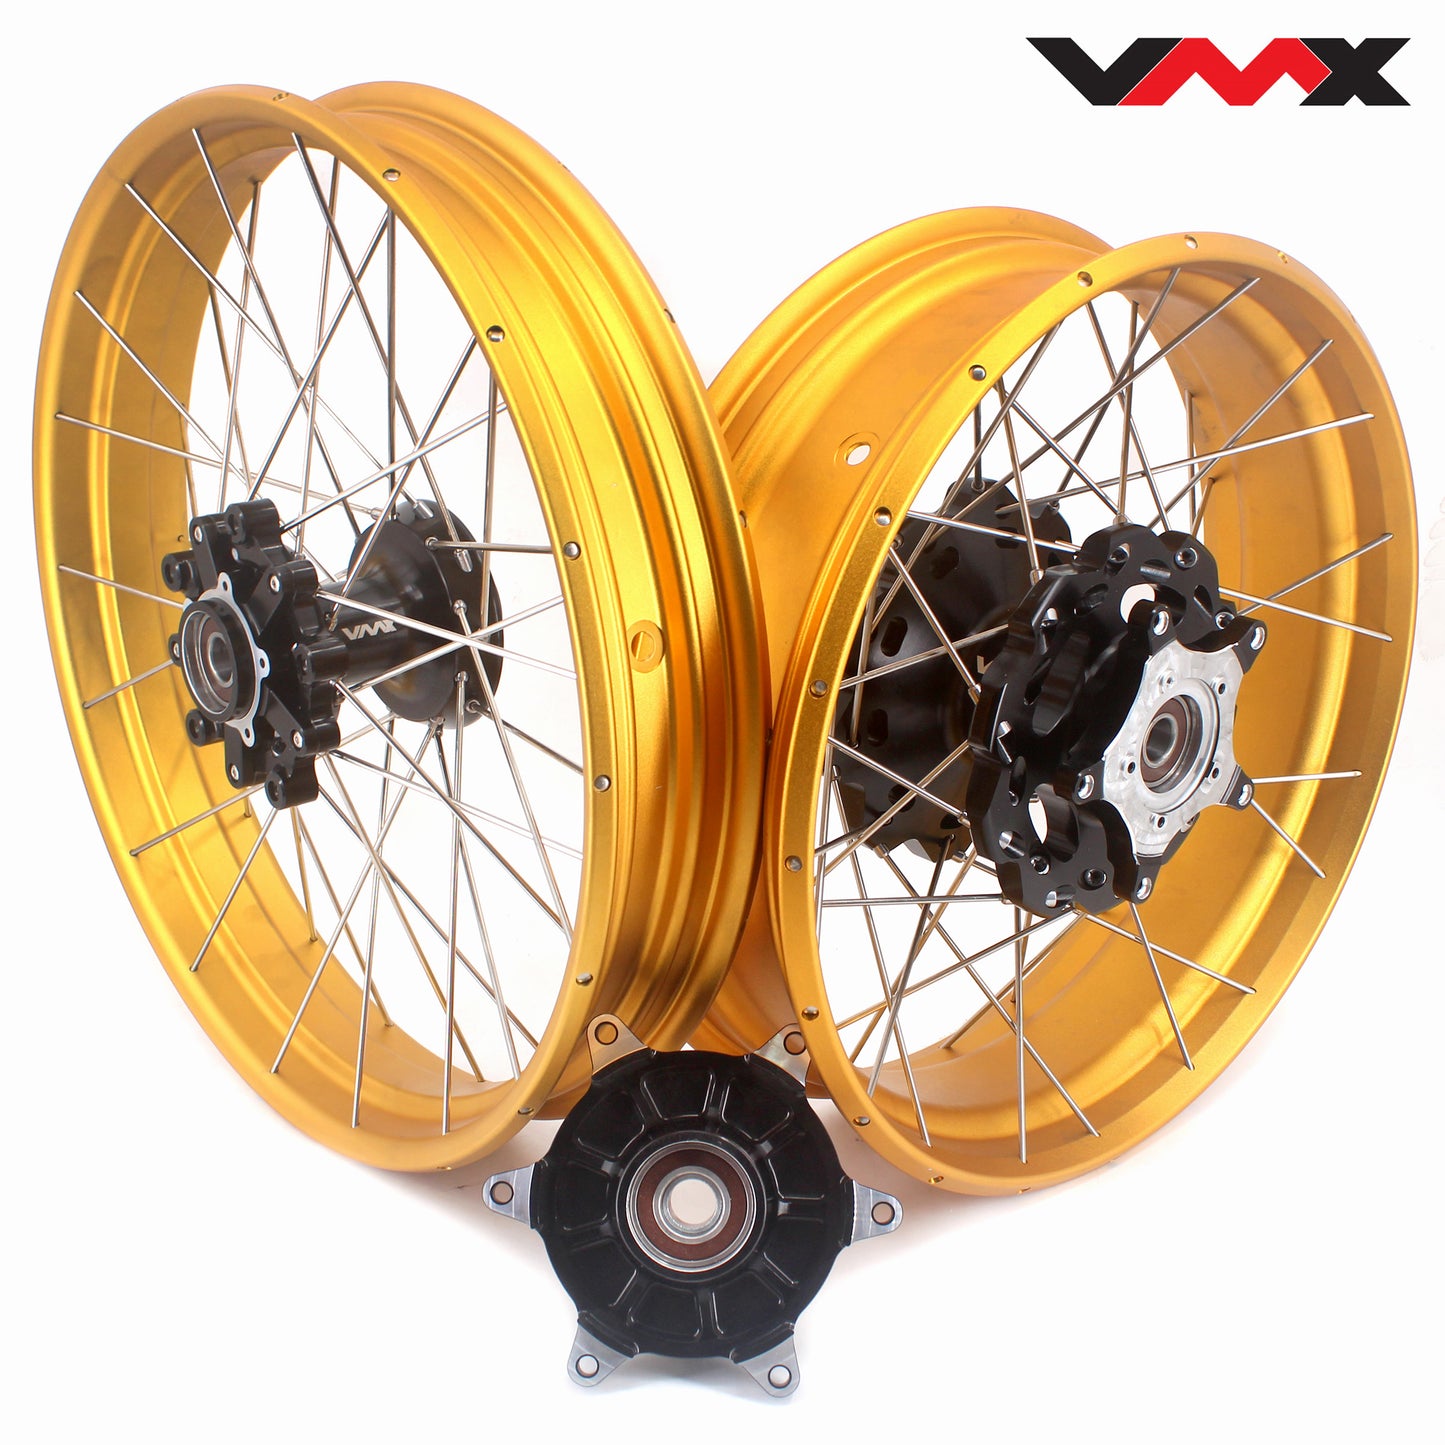 VMX 19inch & 17inch CUSH Drive Motorcycle Tubeless Wheels Rims For BMW G310GS 2016-2023